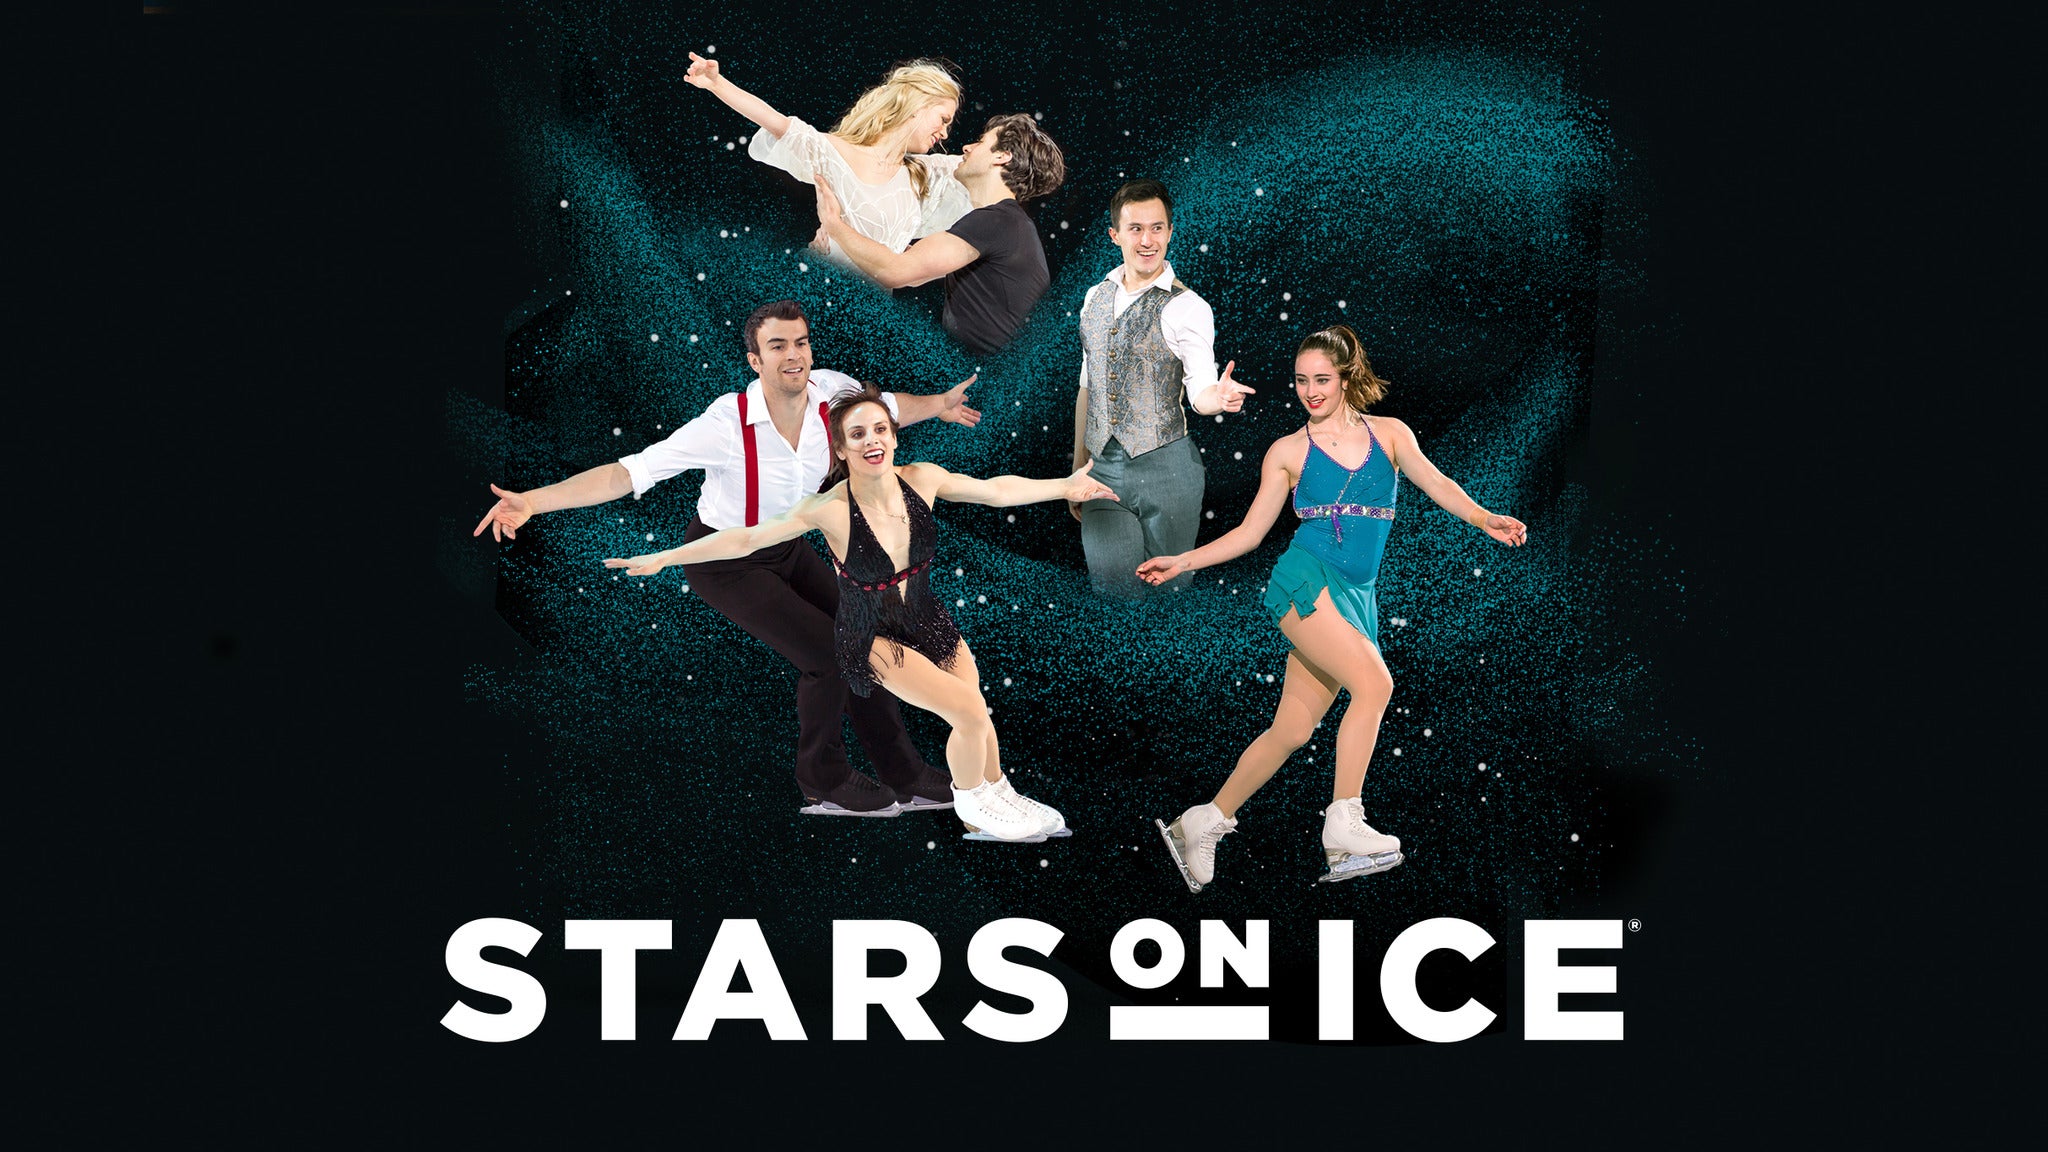 Stars on Ice - Canada in Calgary promo photo for Exclusive presale offer code